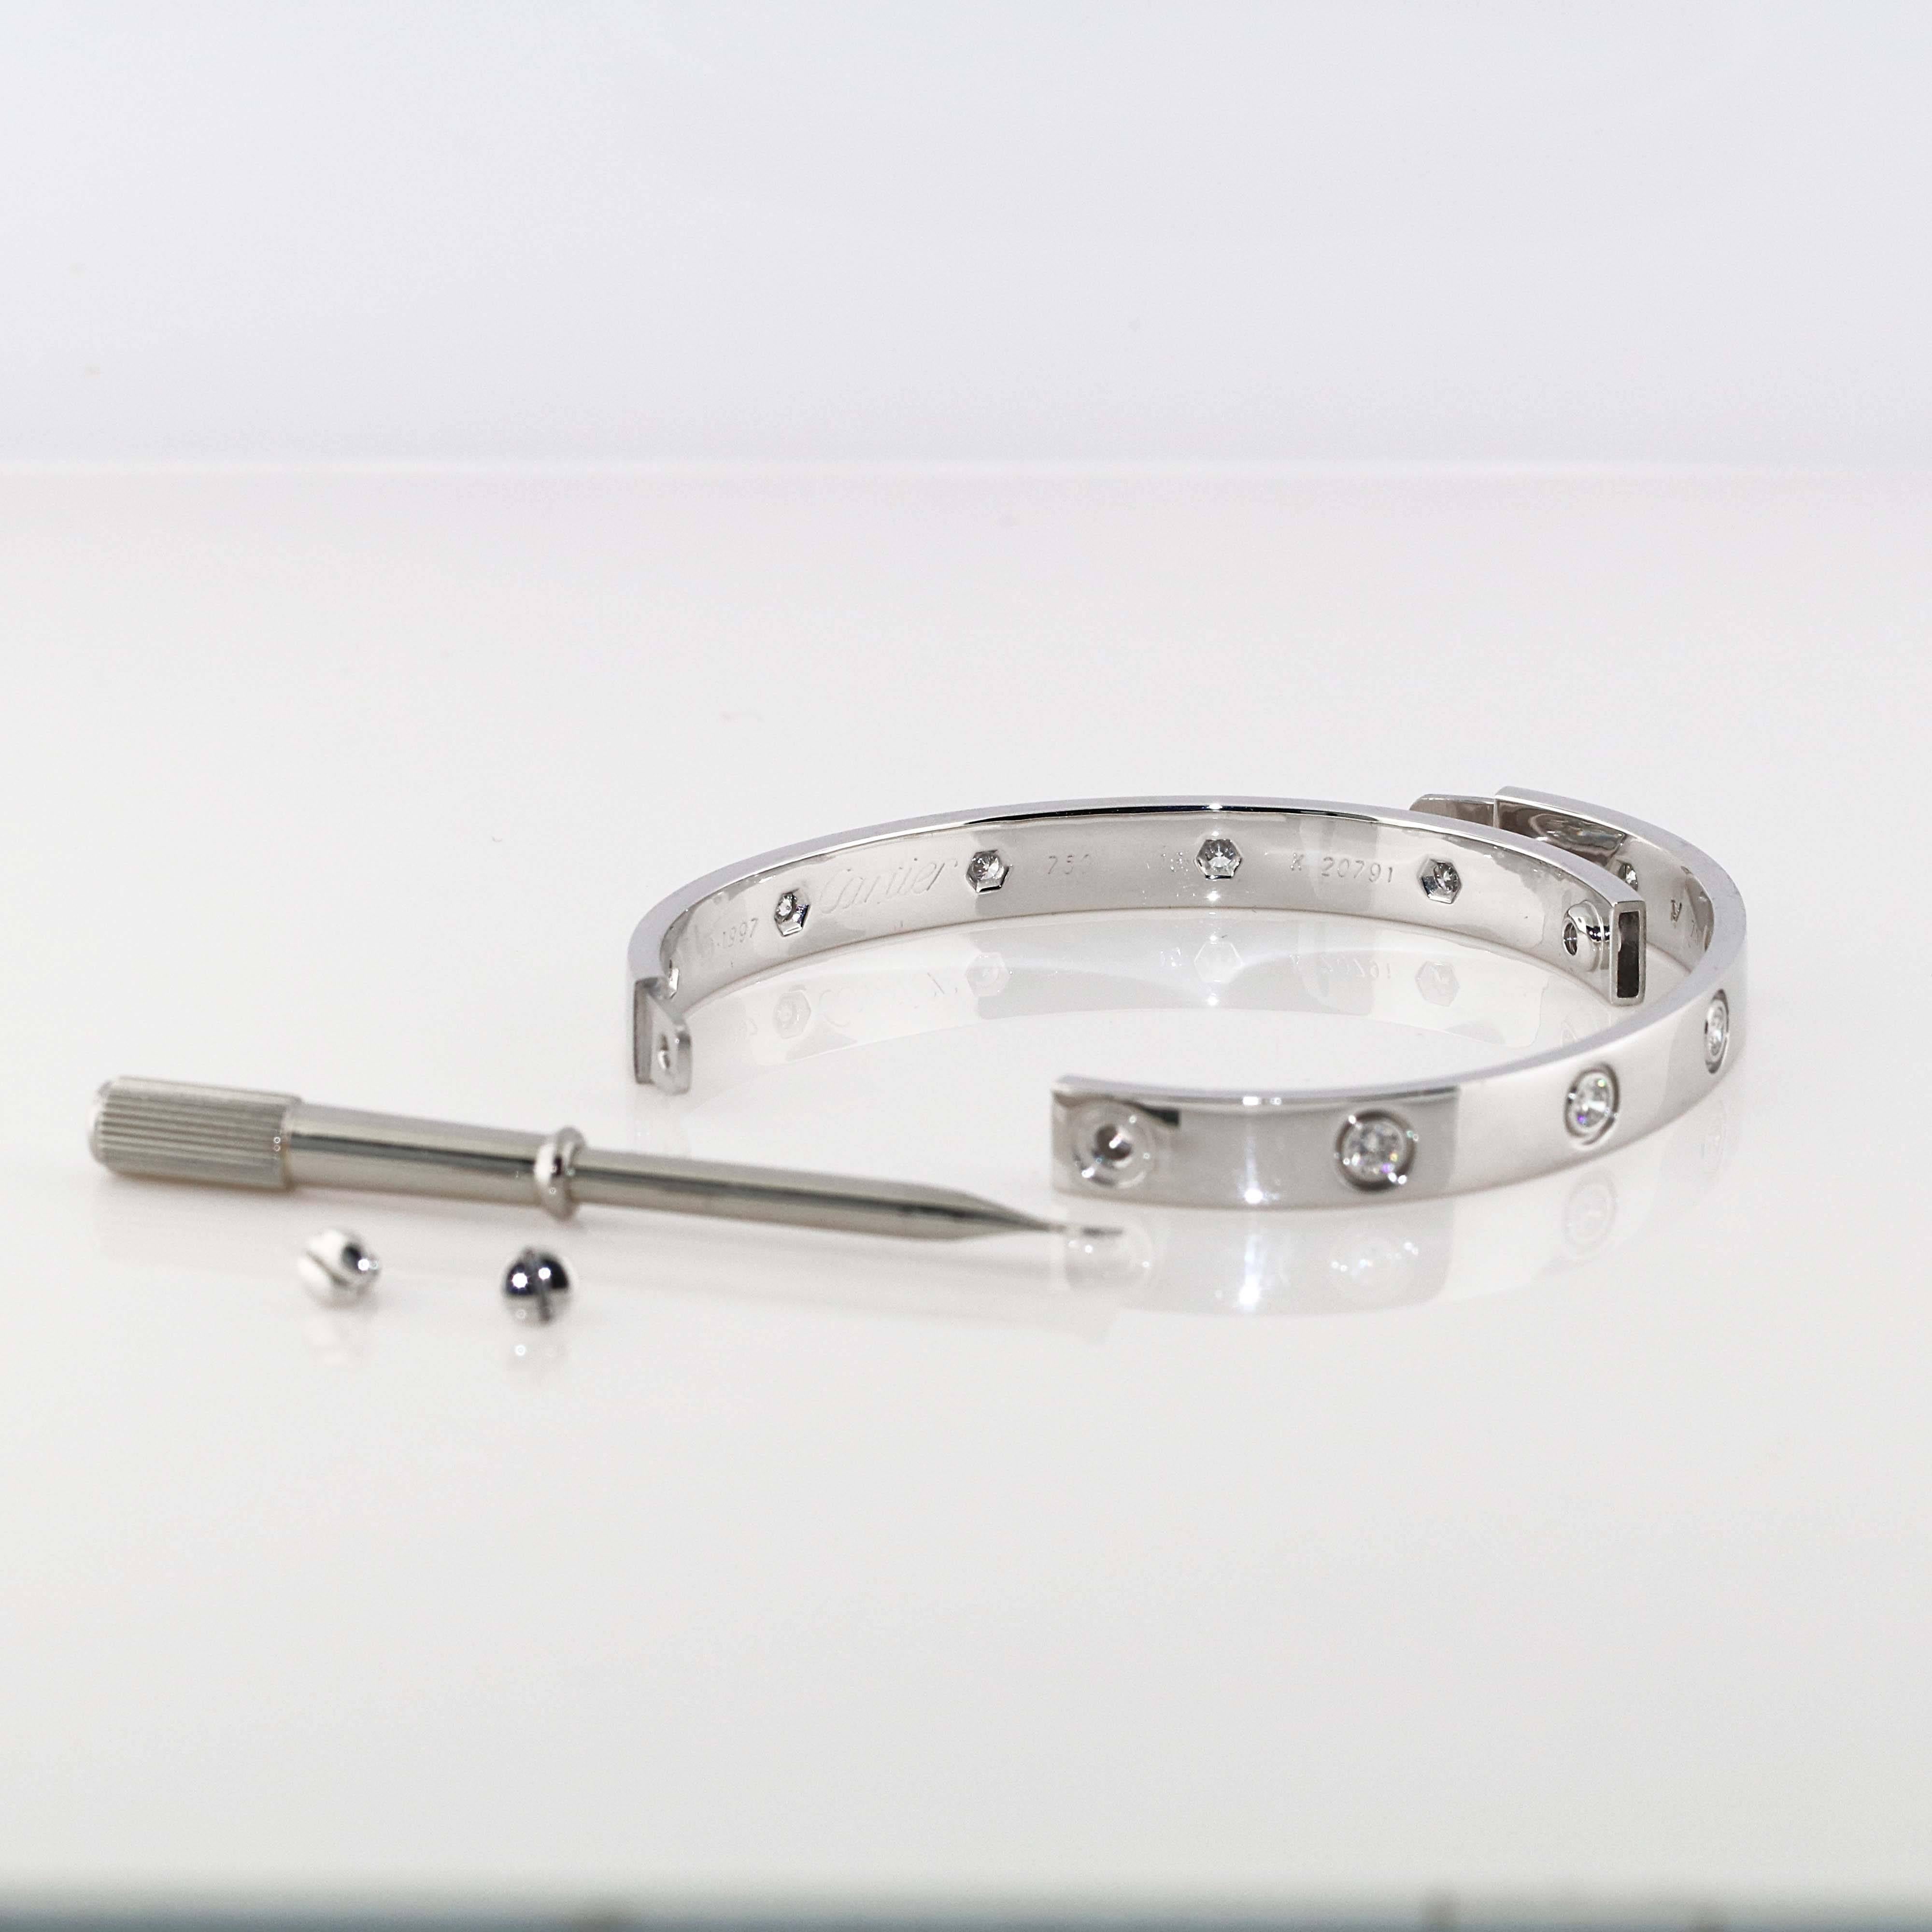 This iconic and timeless bracelet from Cartier's Love collection is finely crafted in 18k white gold and set with 10 brilliant-cut round diamonds. The diamonds are F-G Color and VS in clarity. This bangle is the size 16 model. 

Made in France